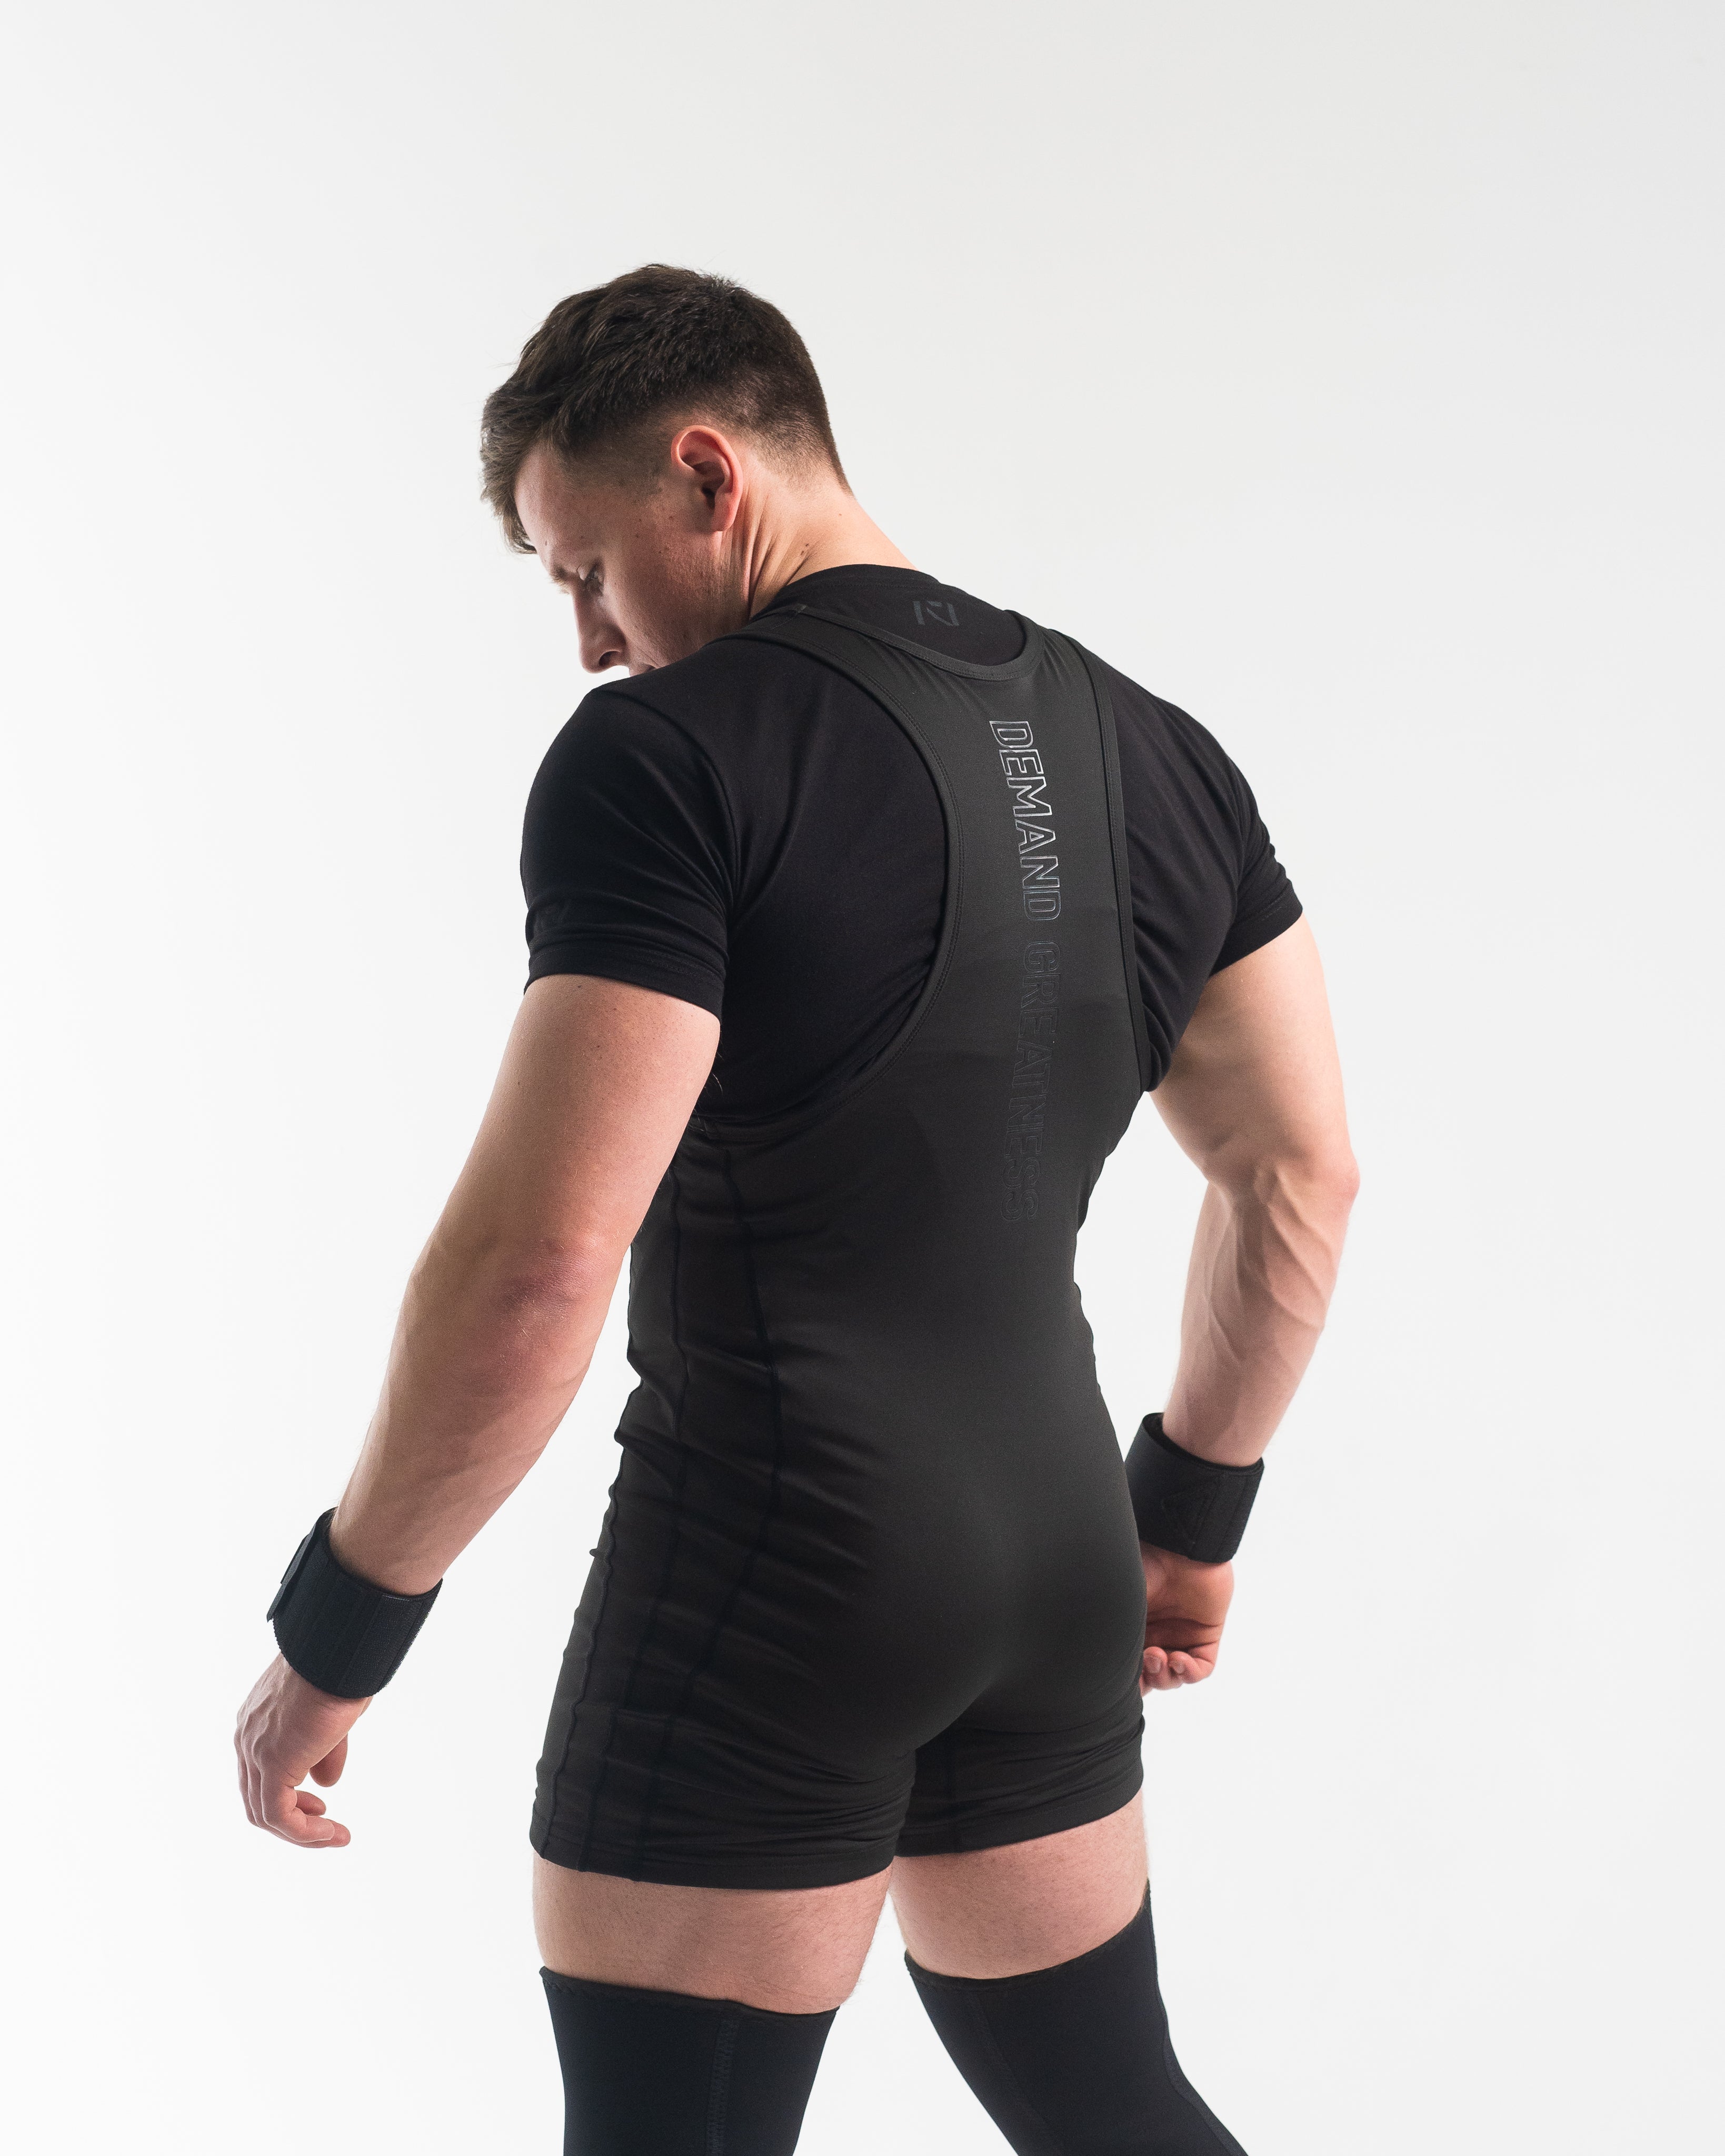 Apex Weightlifting Singlet - Black (IPF Approved)